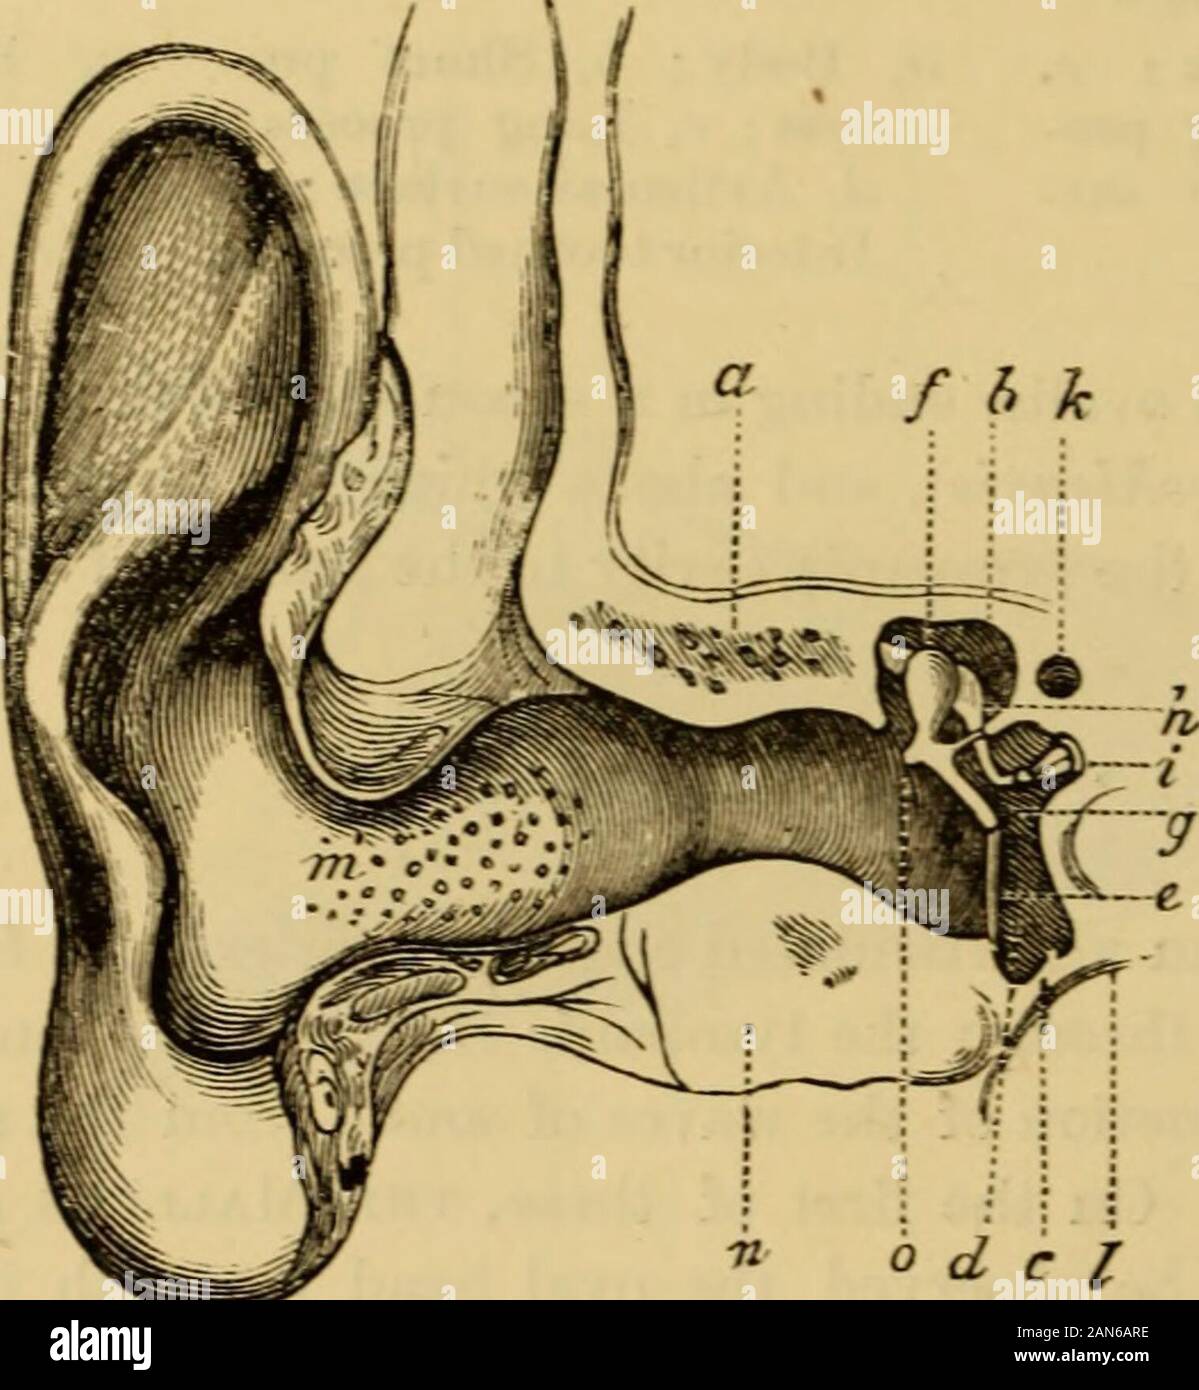 A text-book of the diseases of the ear and adjacent organs . nvex towards the vestibulum, and cor-responds in size to the fenestra ovalis. According to the variation in size ofthe fenestra, the length of the foot-plate varies from 3-35 mm., its breadth 28 OSSICULA. 1*5-2 mm. The average weight, as given by Eitelberg. of the hammer is0,023. the incus 0.25. and the stapes 0,002. The longitudinal axis of the malleus is not straight, the head being bent tothe handle at an obtuse angle. The neck of the malleus extends on theinside to the broad rhomboidal surface of the handle. On the external sur-t Stock Photo